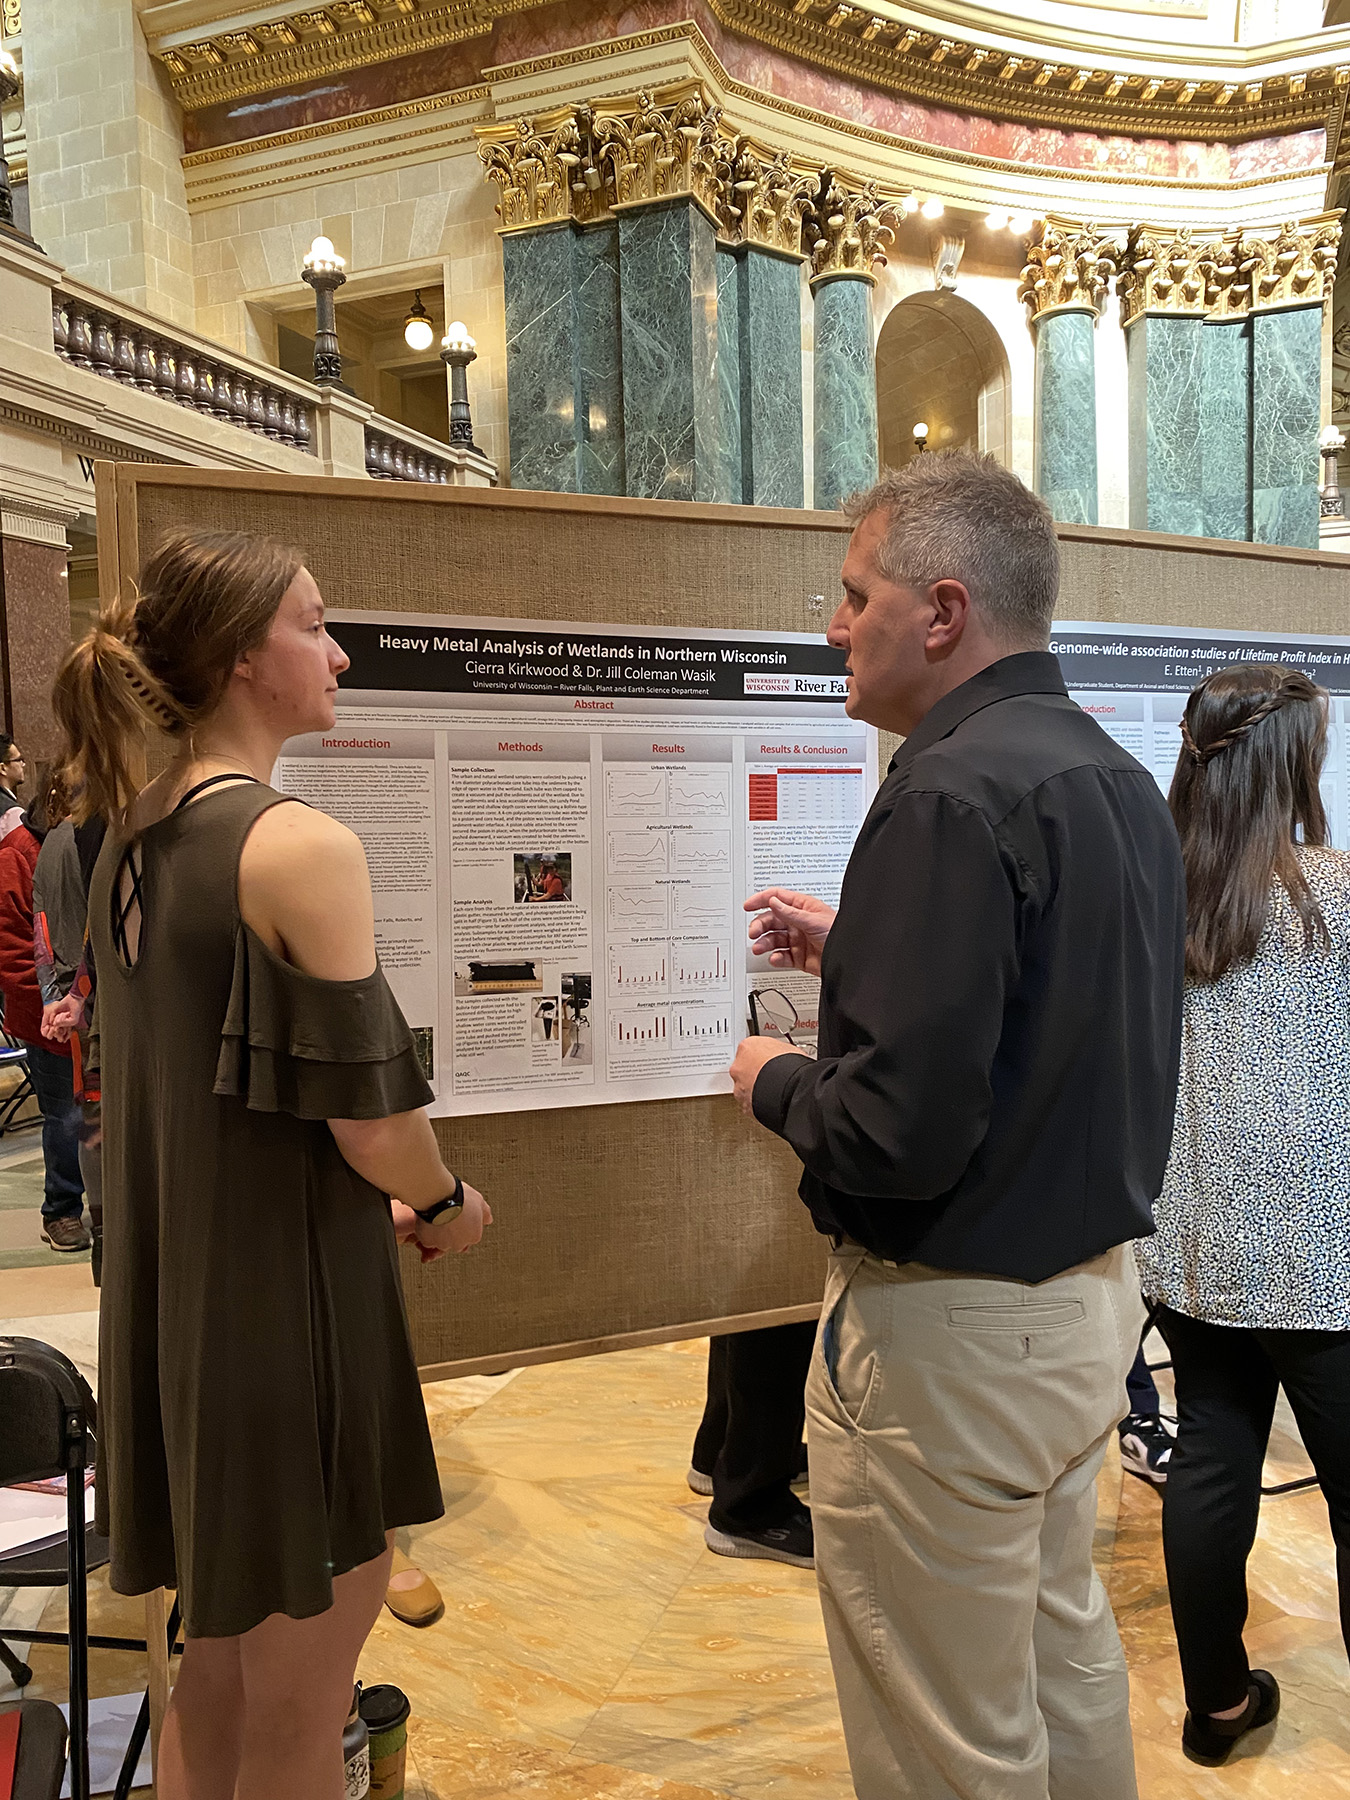 UW-River Falls student Cierra Kirkwood discusses her research about heavy metals in northern Wisconsin waterways with Rep. Shannon Zimmerman, R-River Falls, during the March 8 Research in the Rotunda event at the state Capitol in Madison.